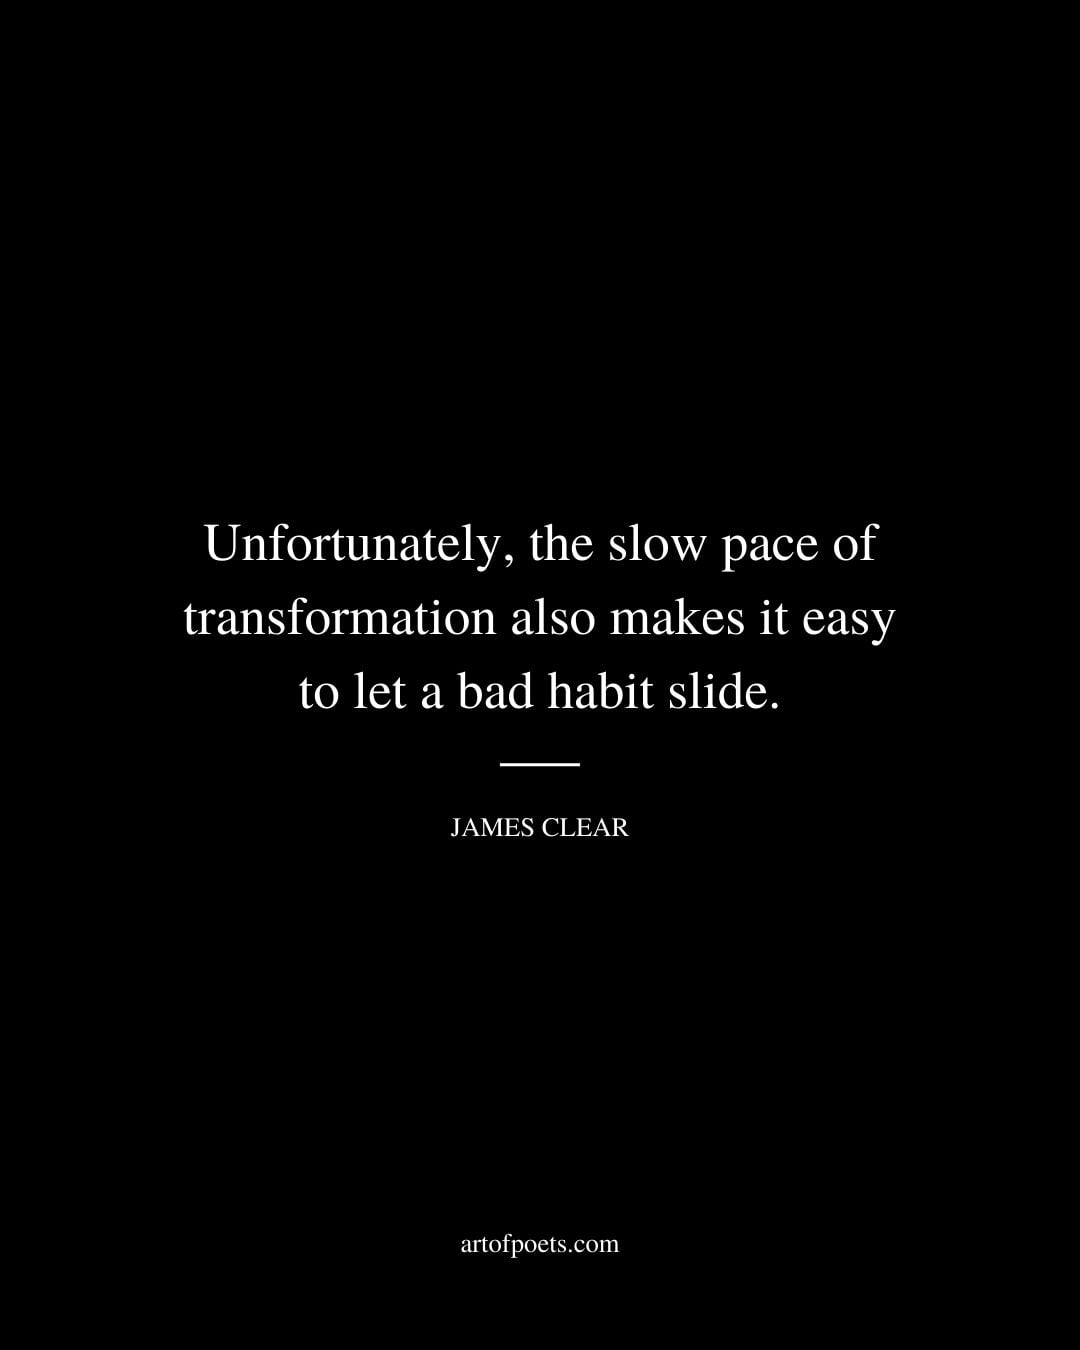 Unfortunately the slow pace of transformation also makes it easy to let a bad habit slide